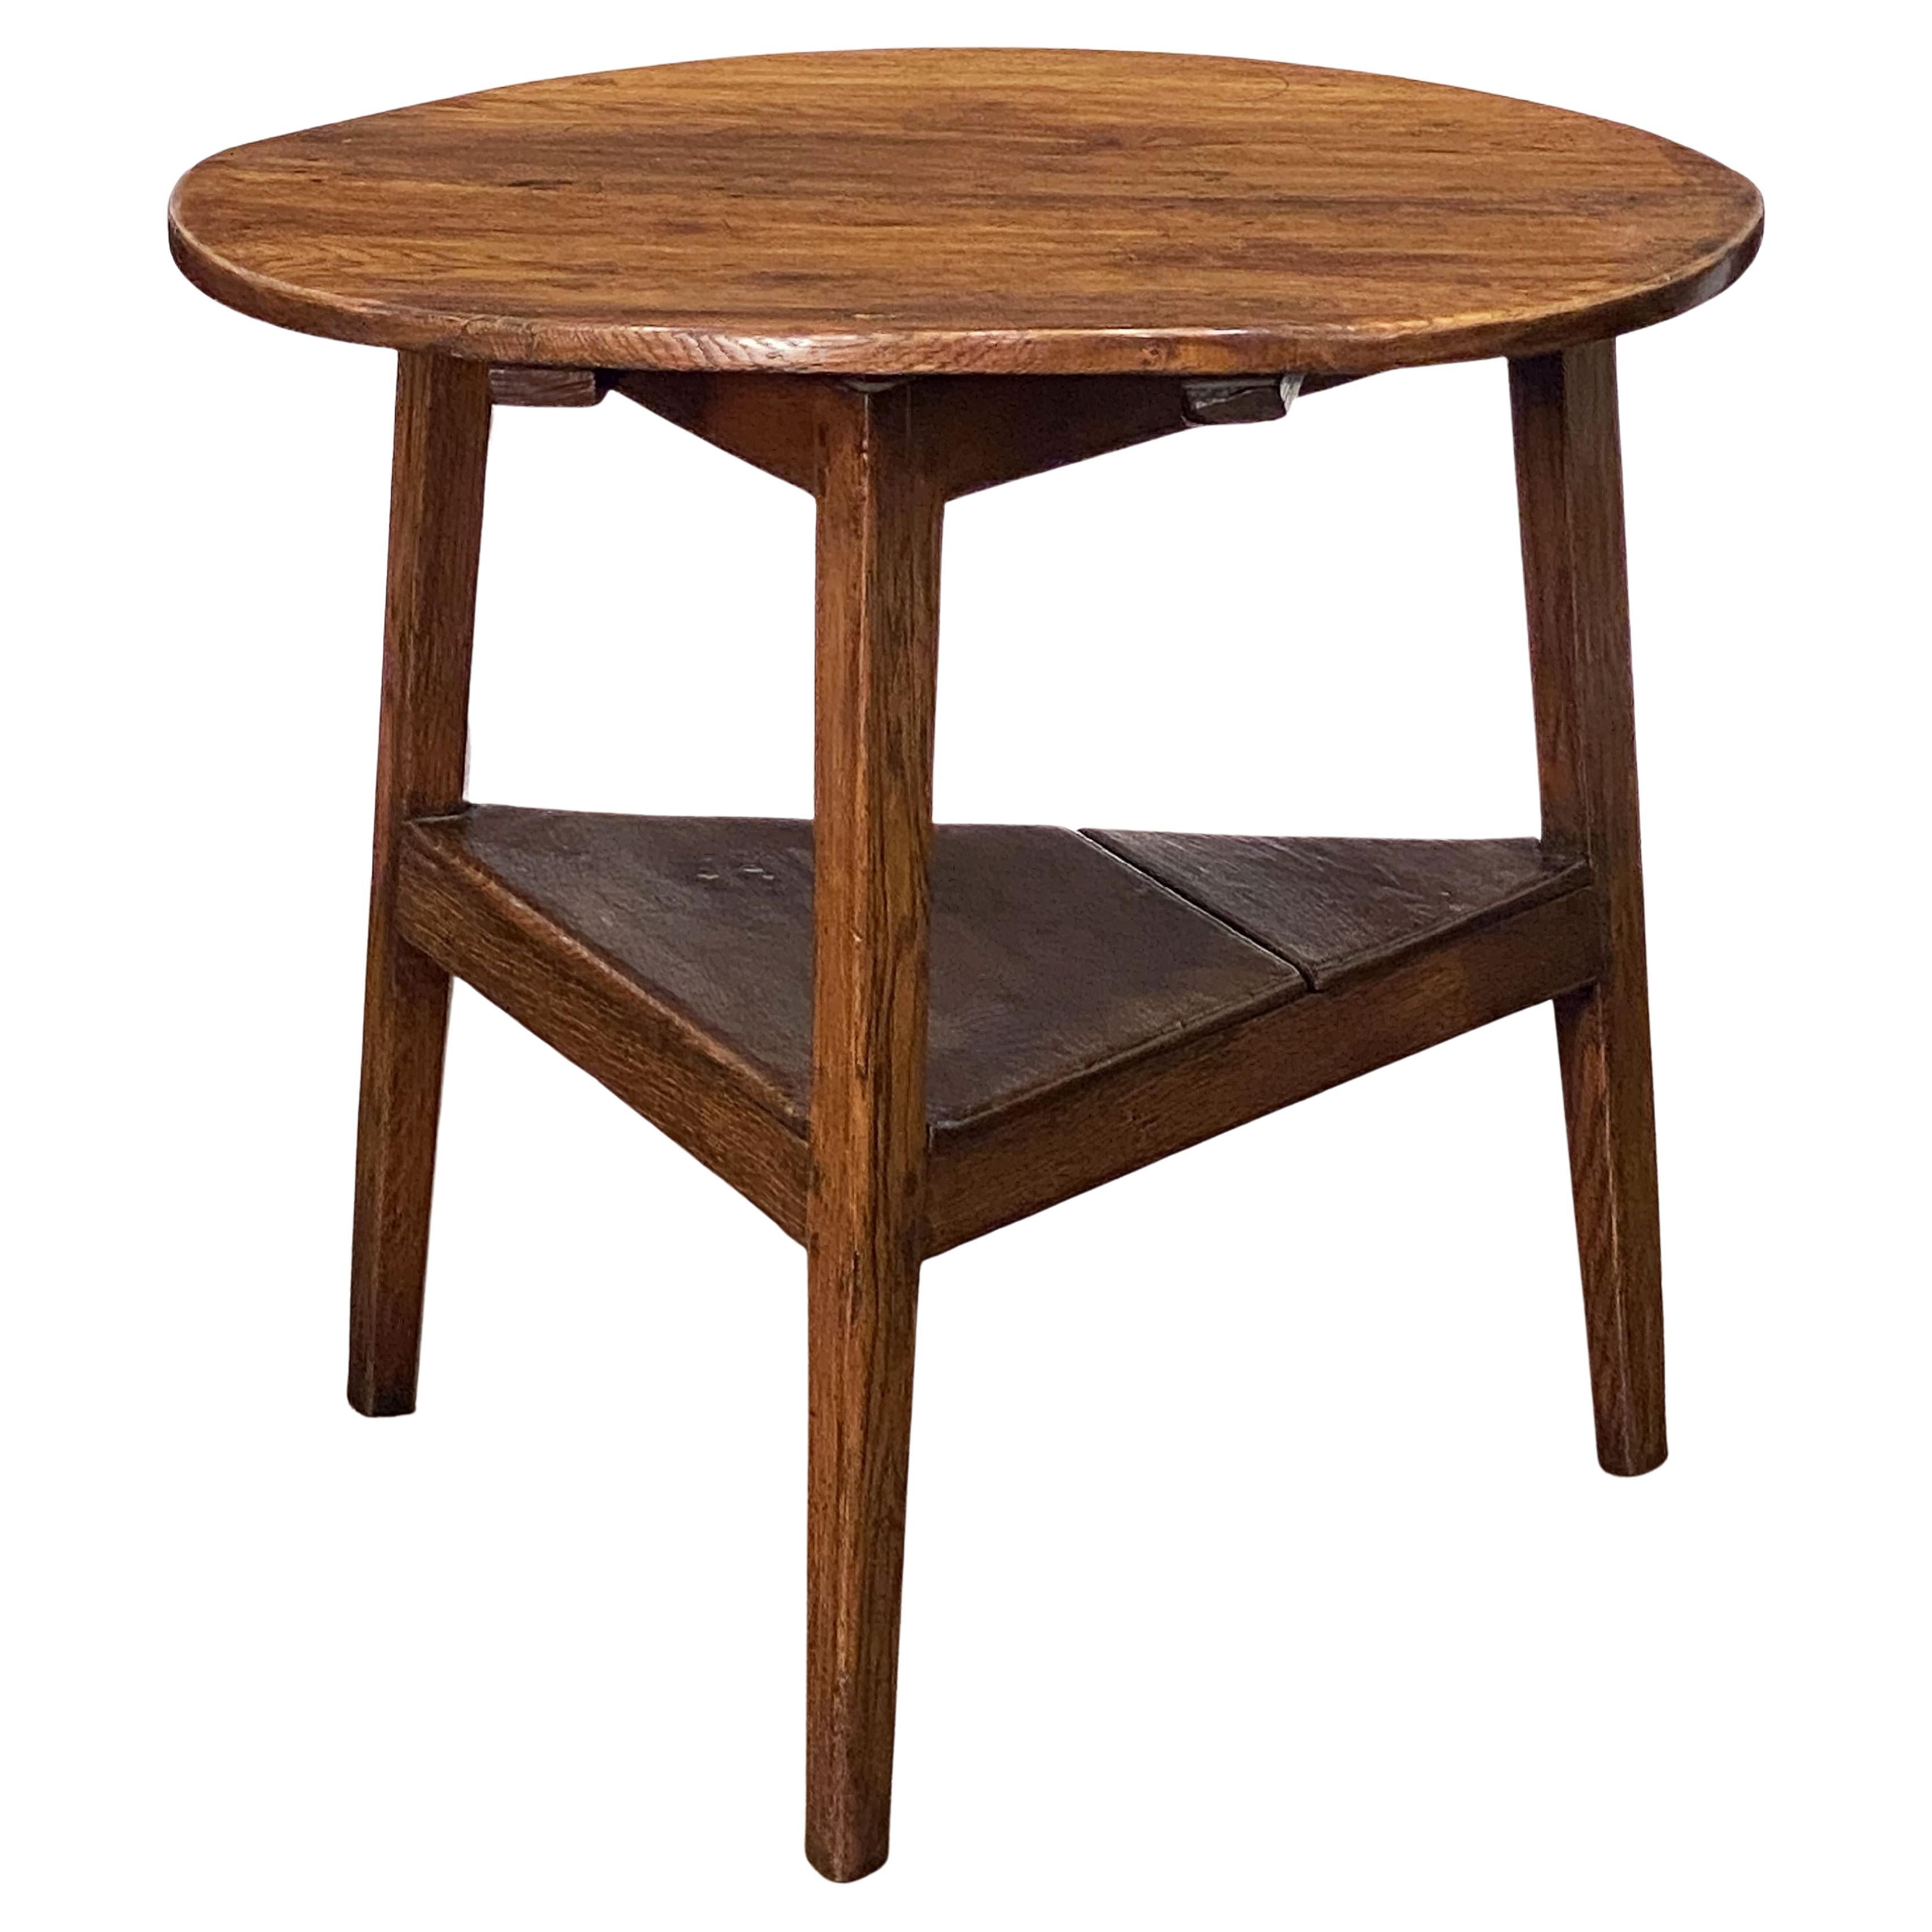 A fine English cricket table of patinated oak from the late Georgian era, featuring the traditional, rustic round or circular dowel-pegged top over a tripod base with triangular under-tier shelf.

Makes a nice occasional table or side